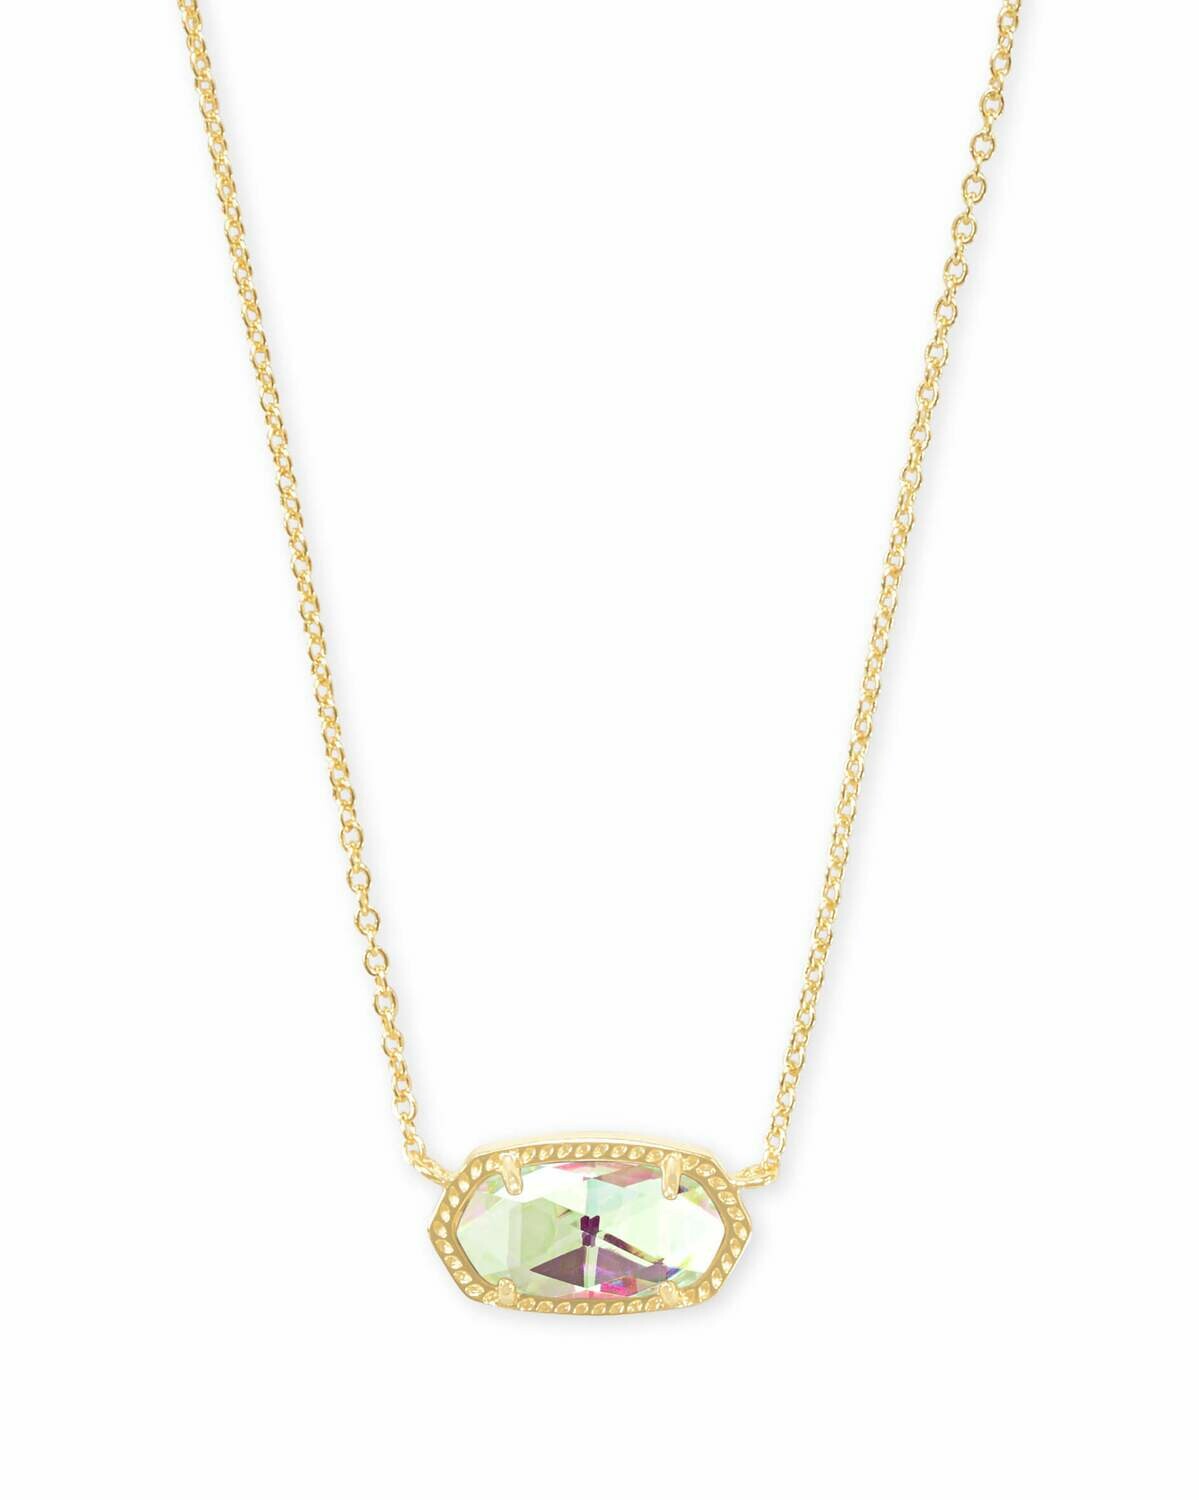 Kendra Scott Elisa Necklace in Gold/Dichroic Glass